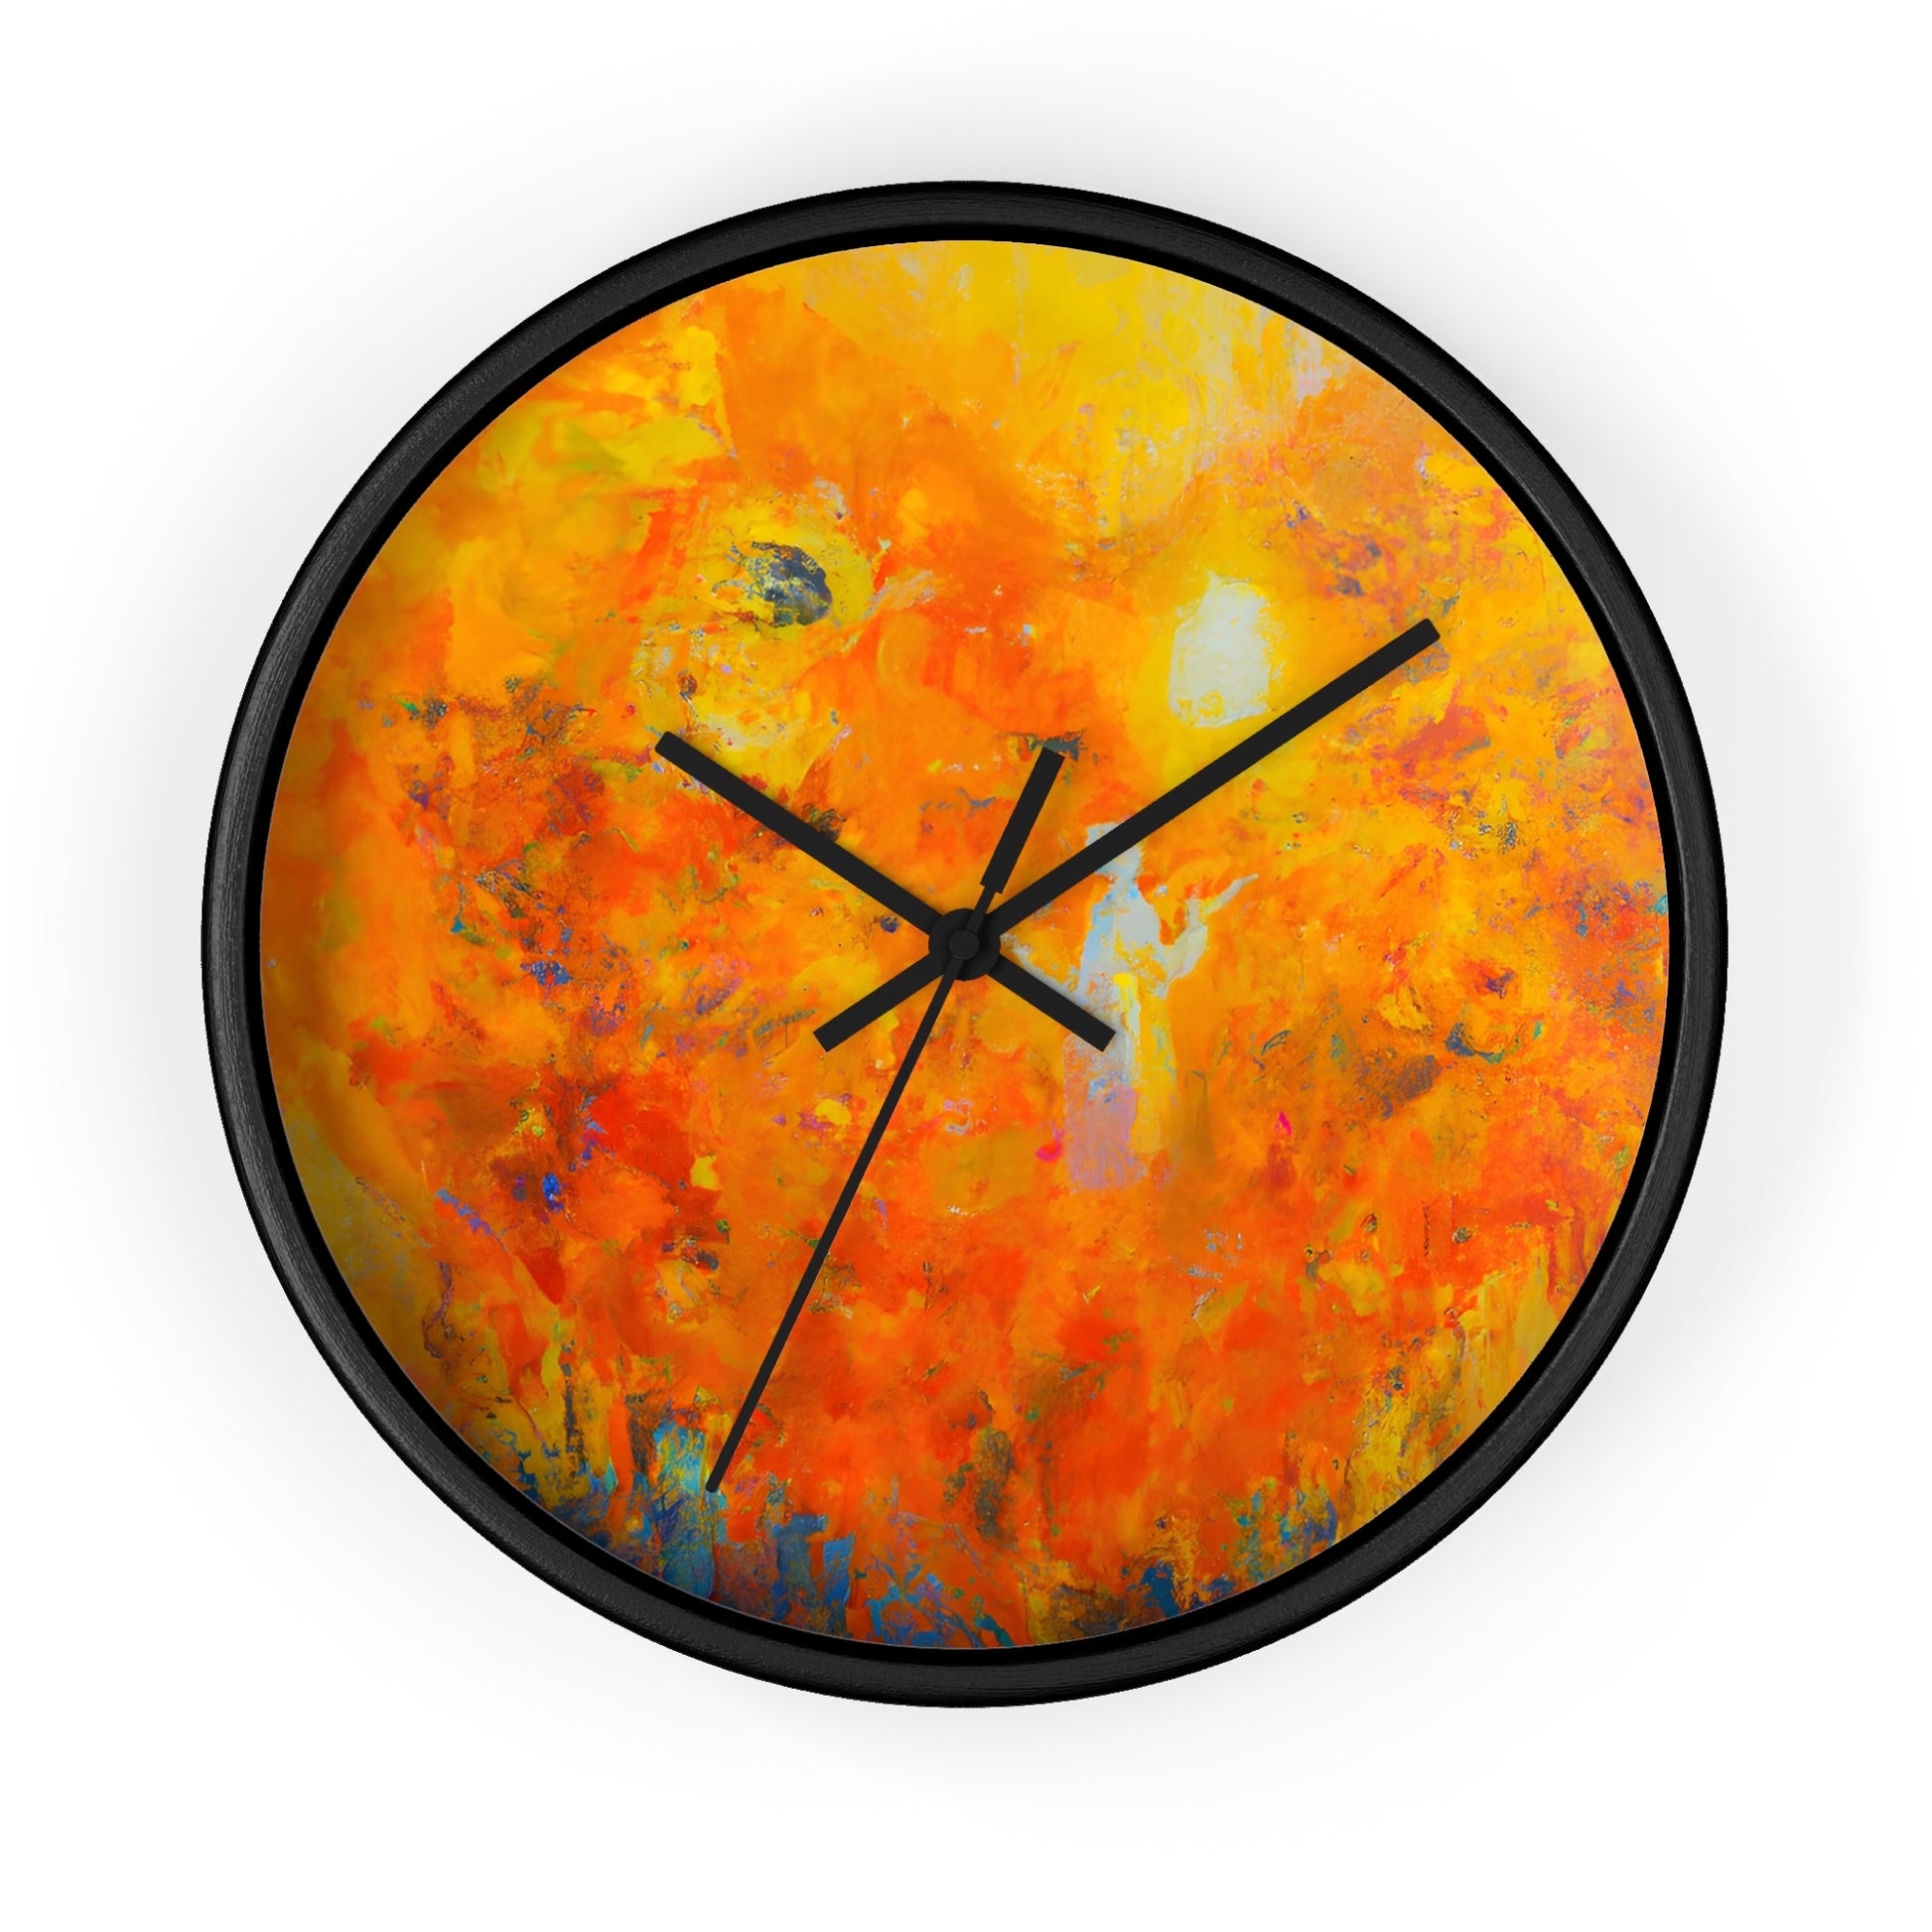 Melodlas - Autism-Inspired Wall Clock